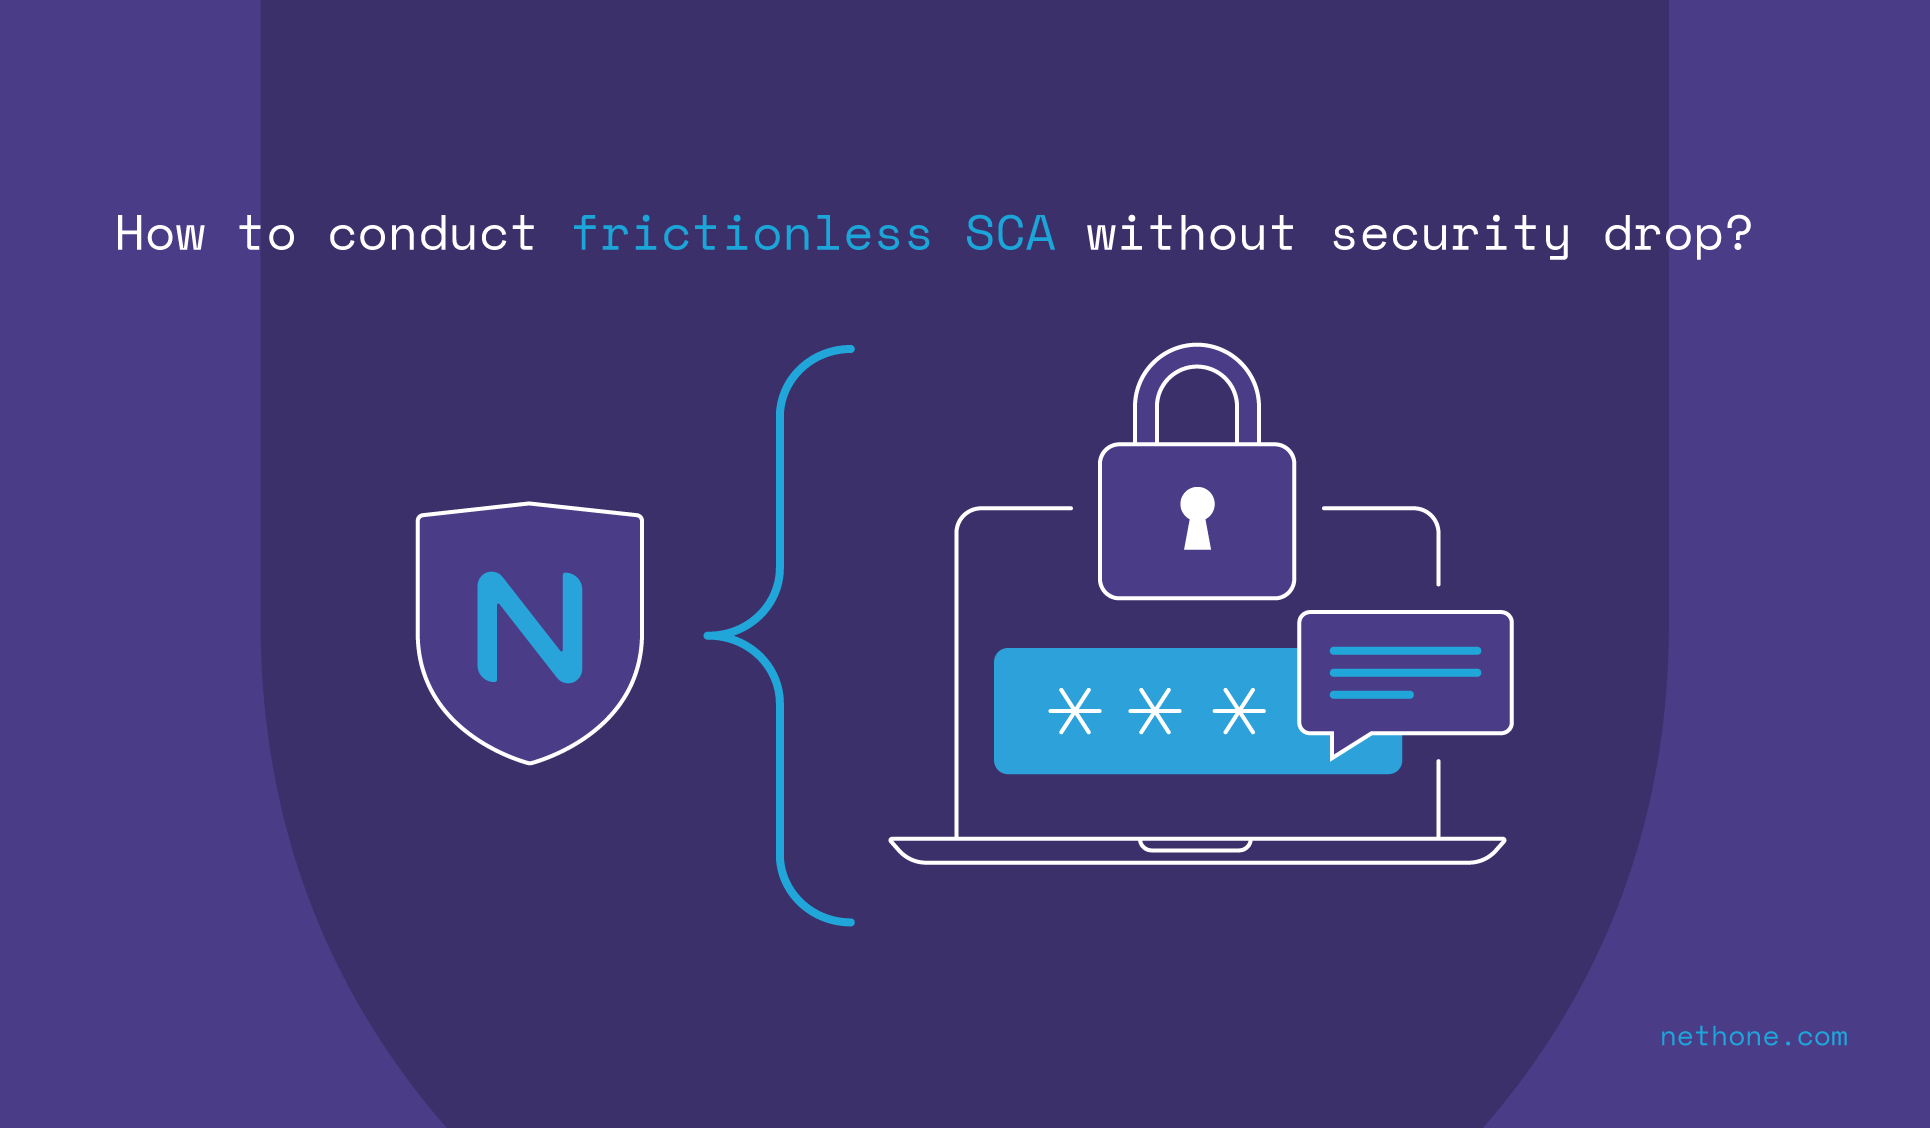 How to conduct frictionless SCA without security drop